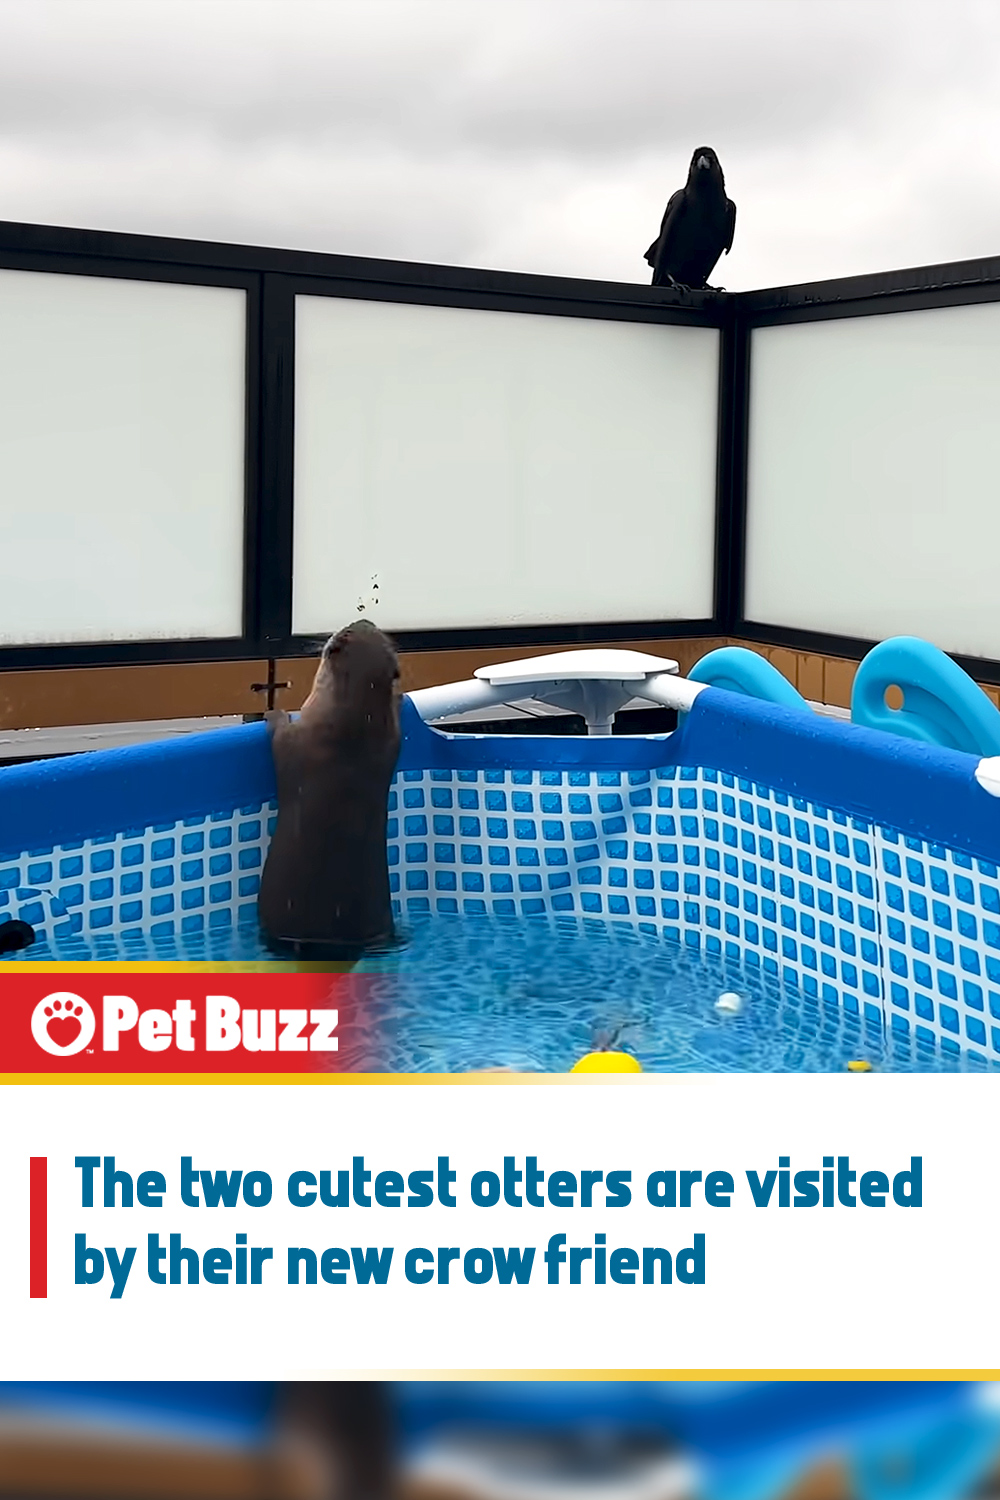 The two cutest otters are visited by their new crow friend